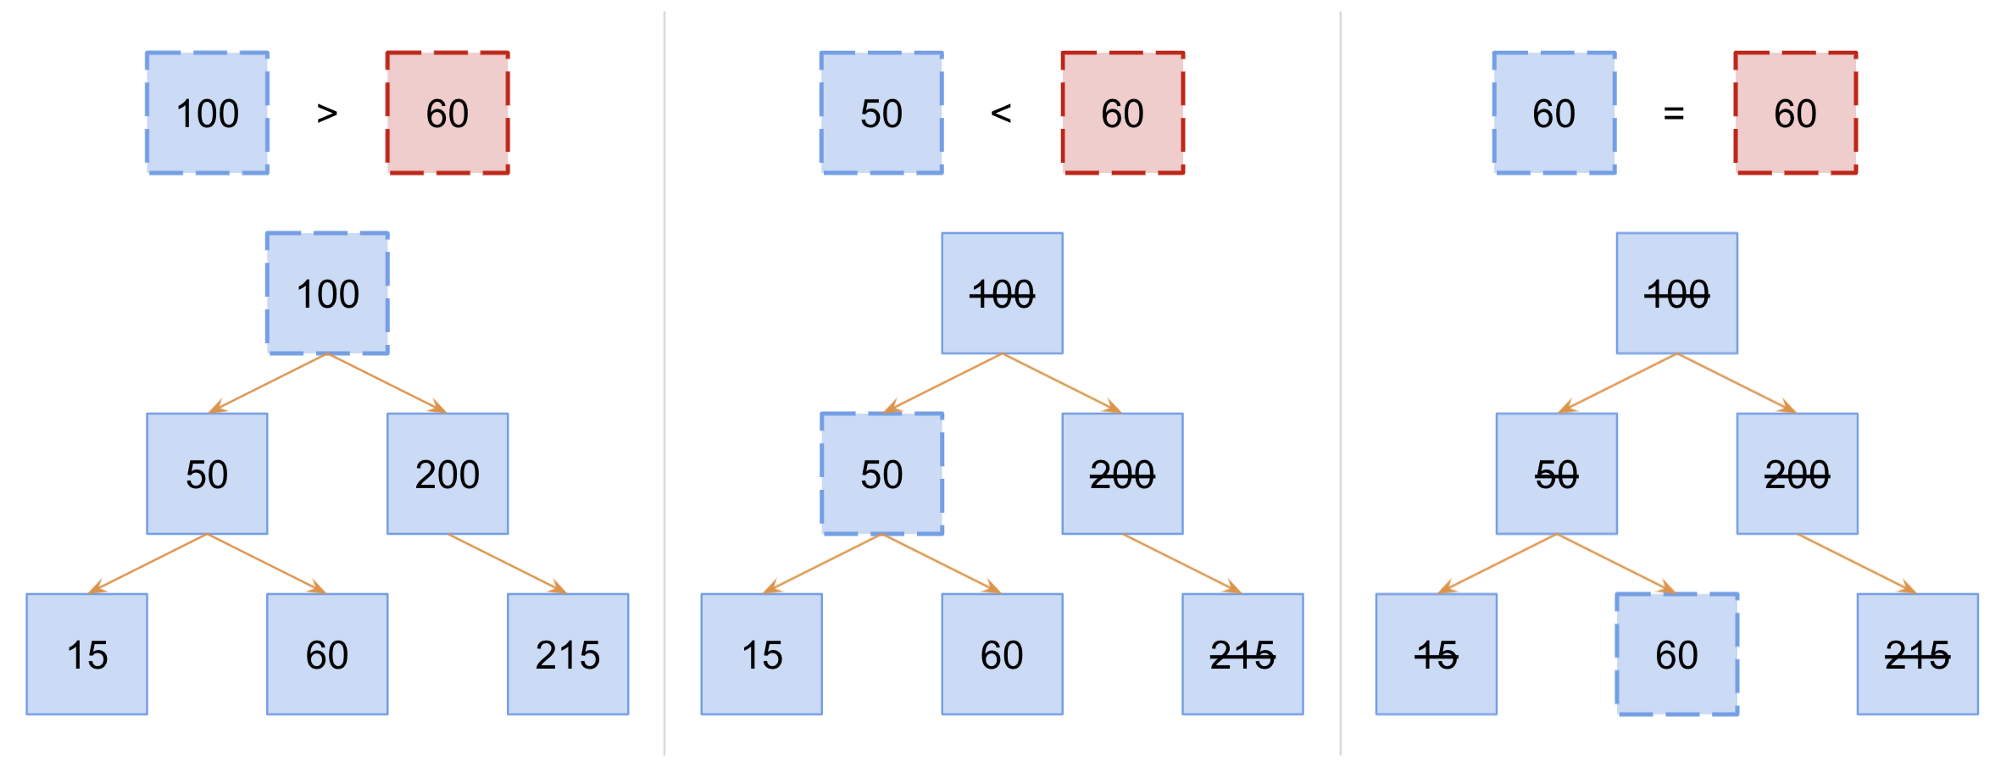 An illustration of a search in a binary search tree